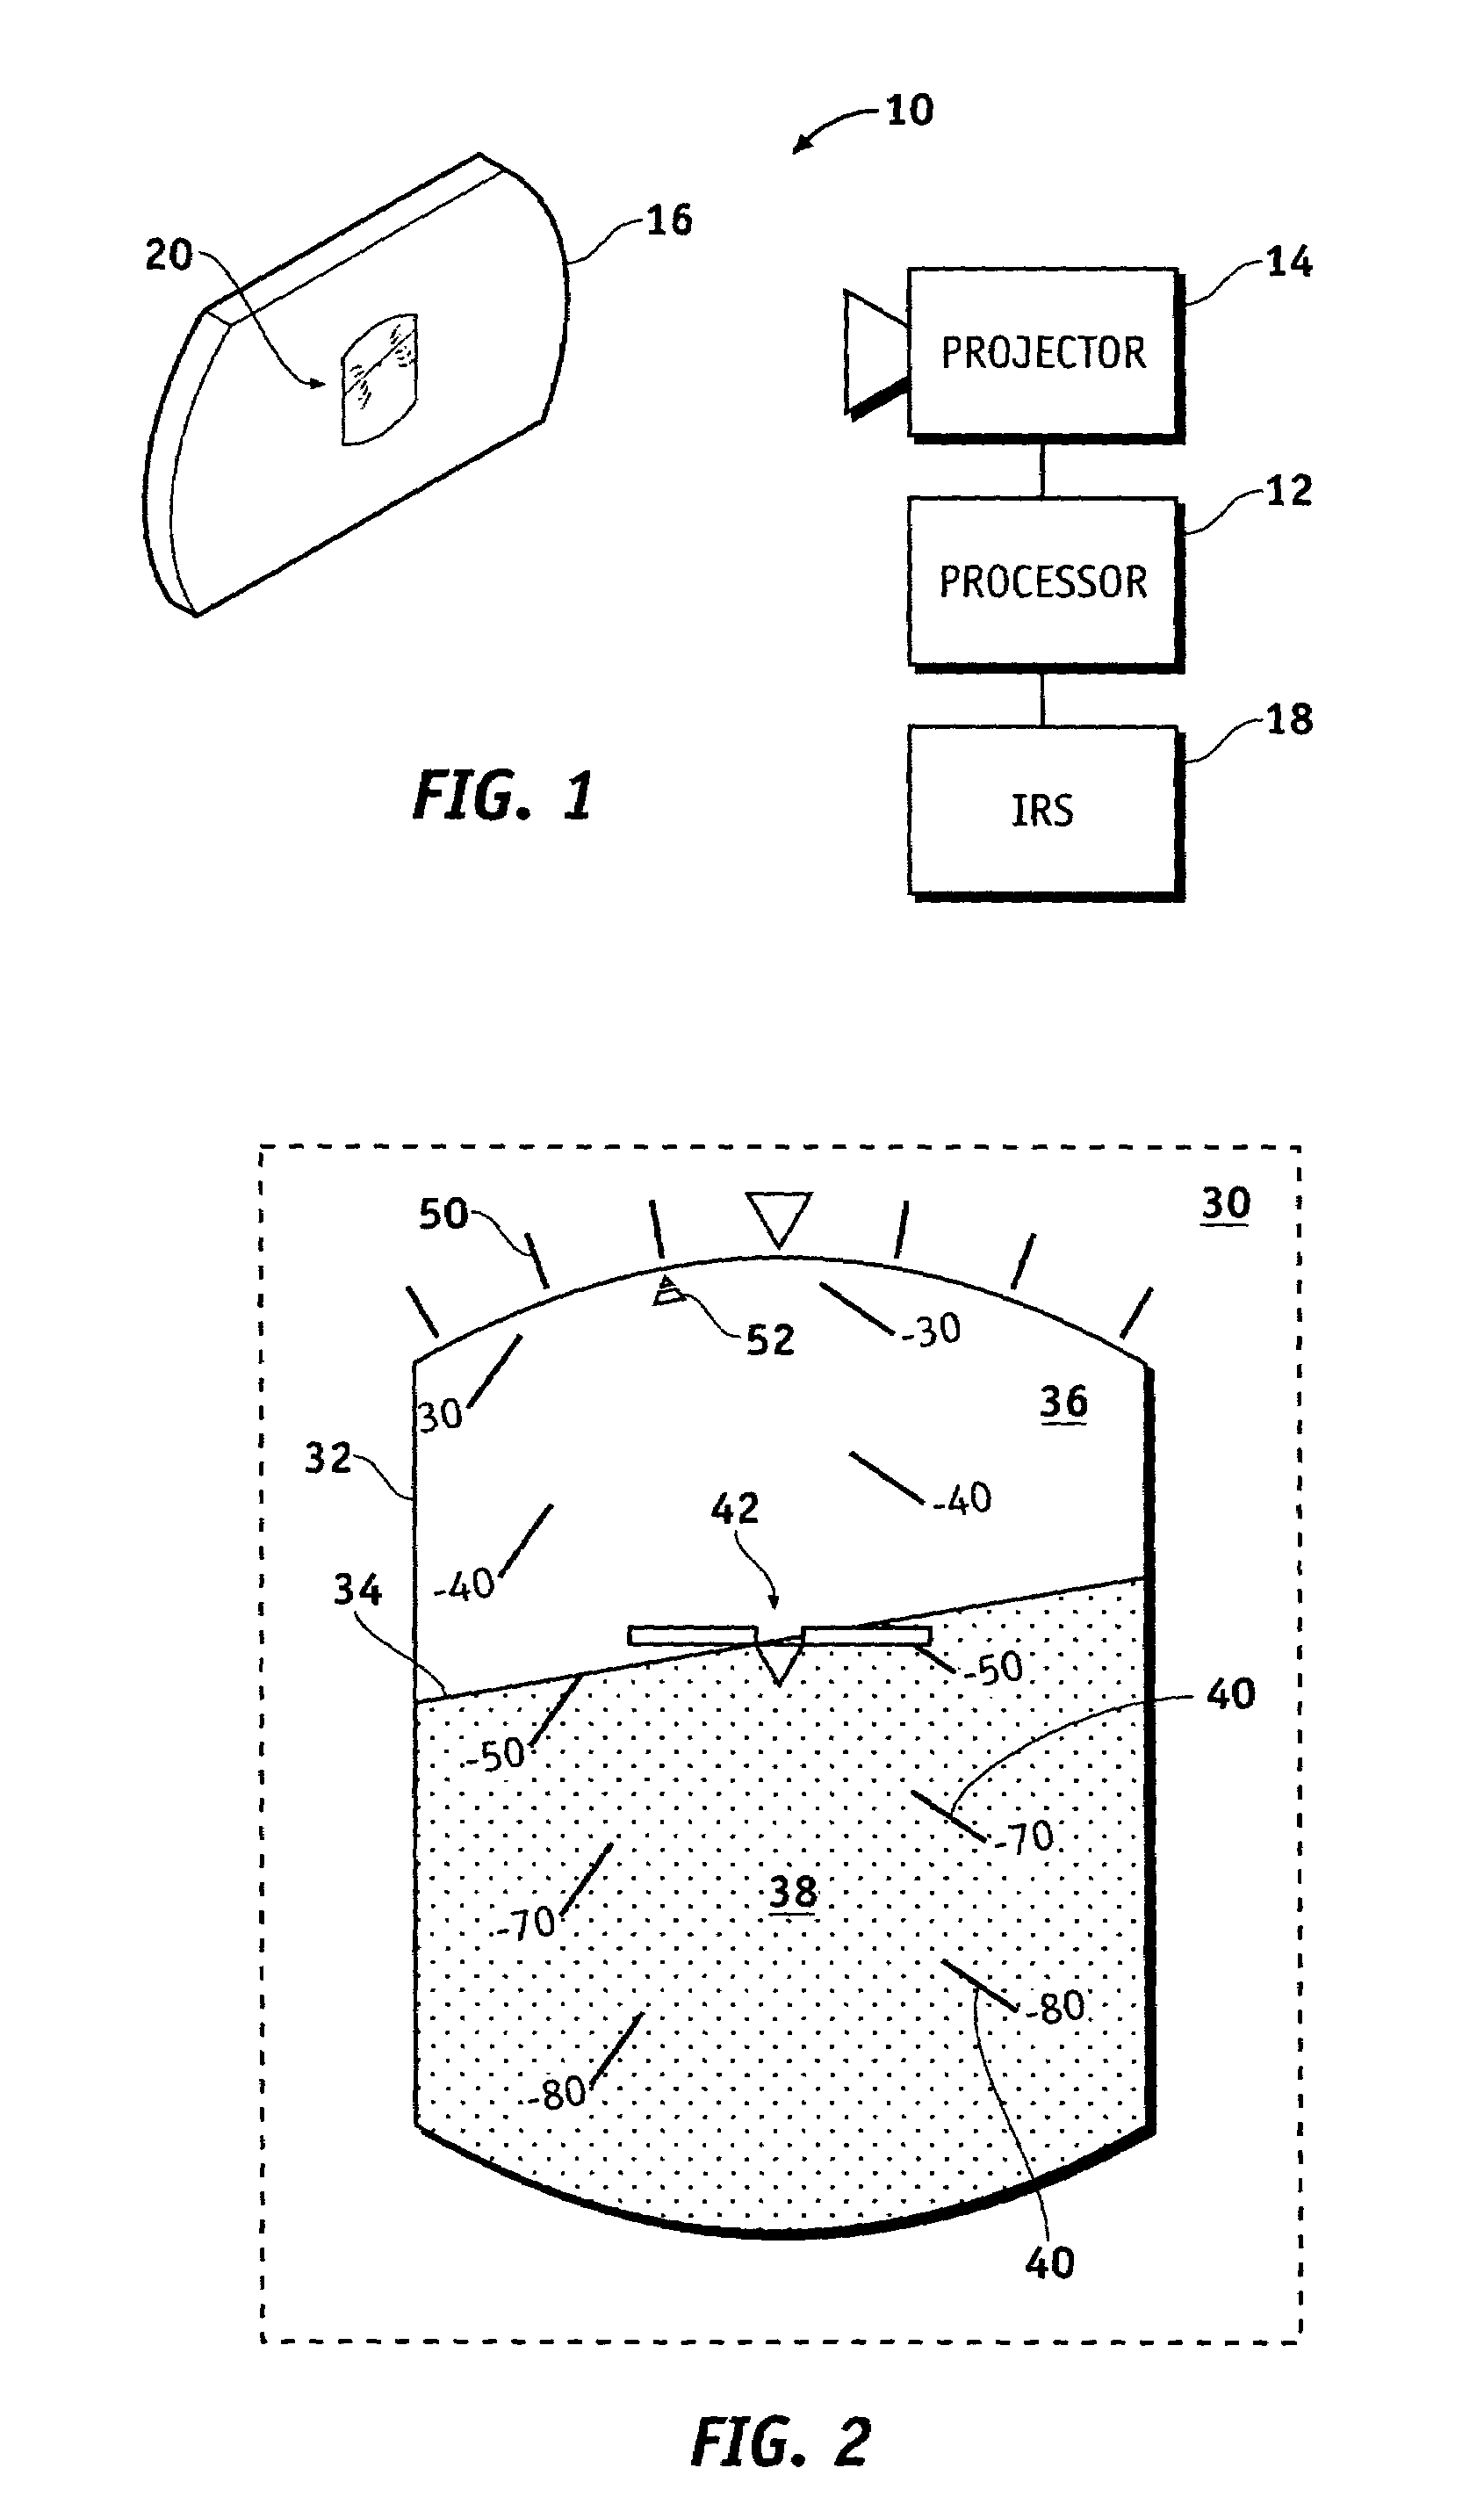 Method and HUD system for displaying unusual attitude